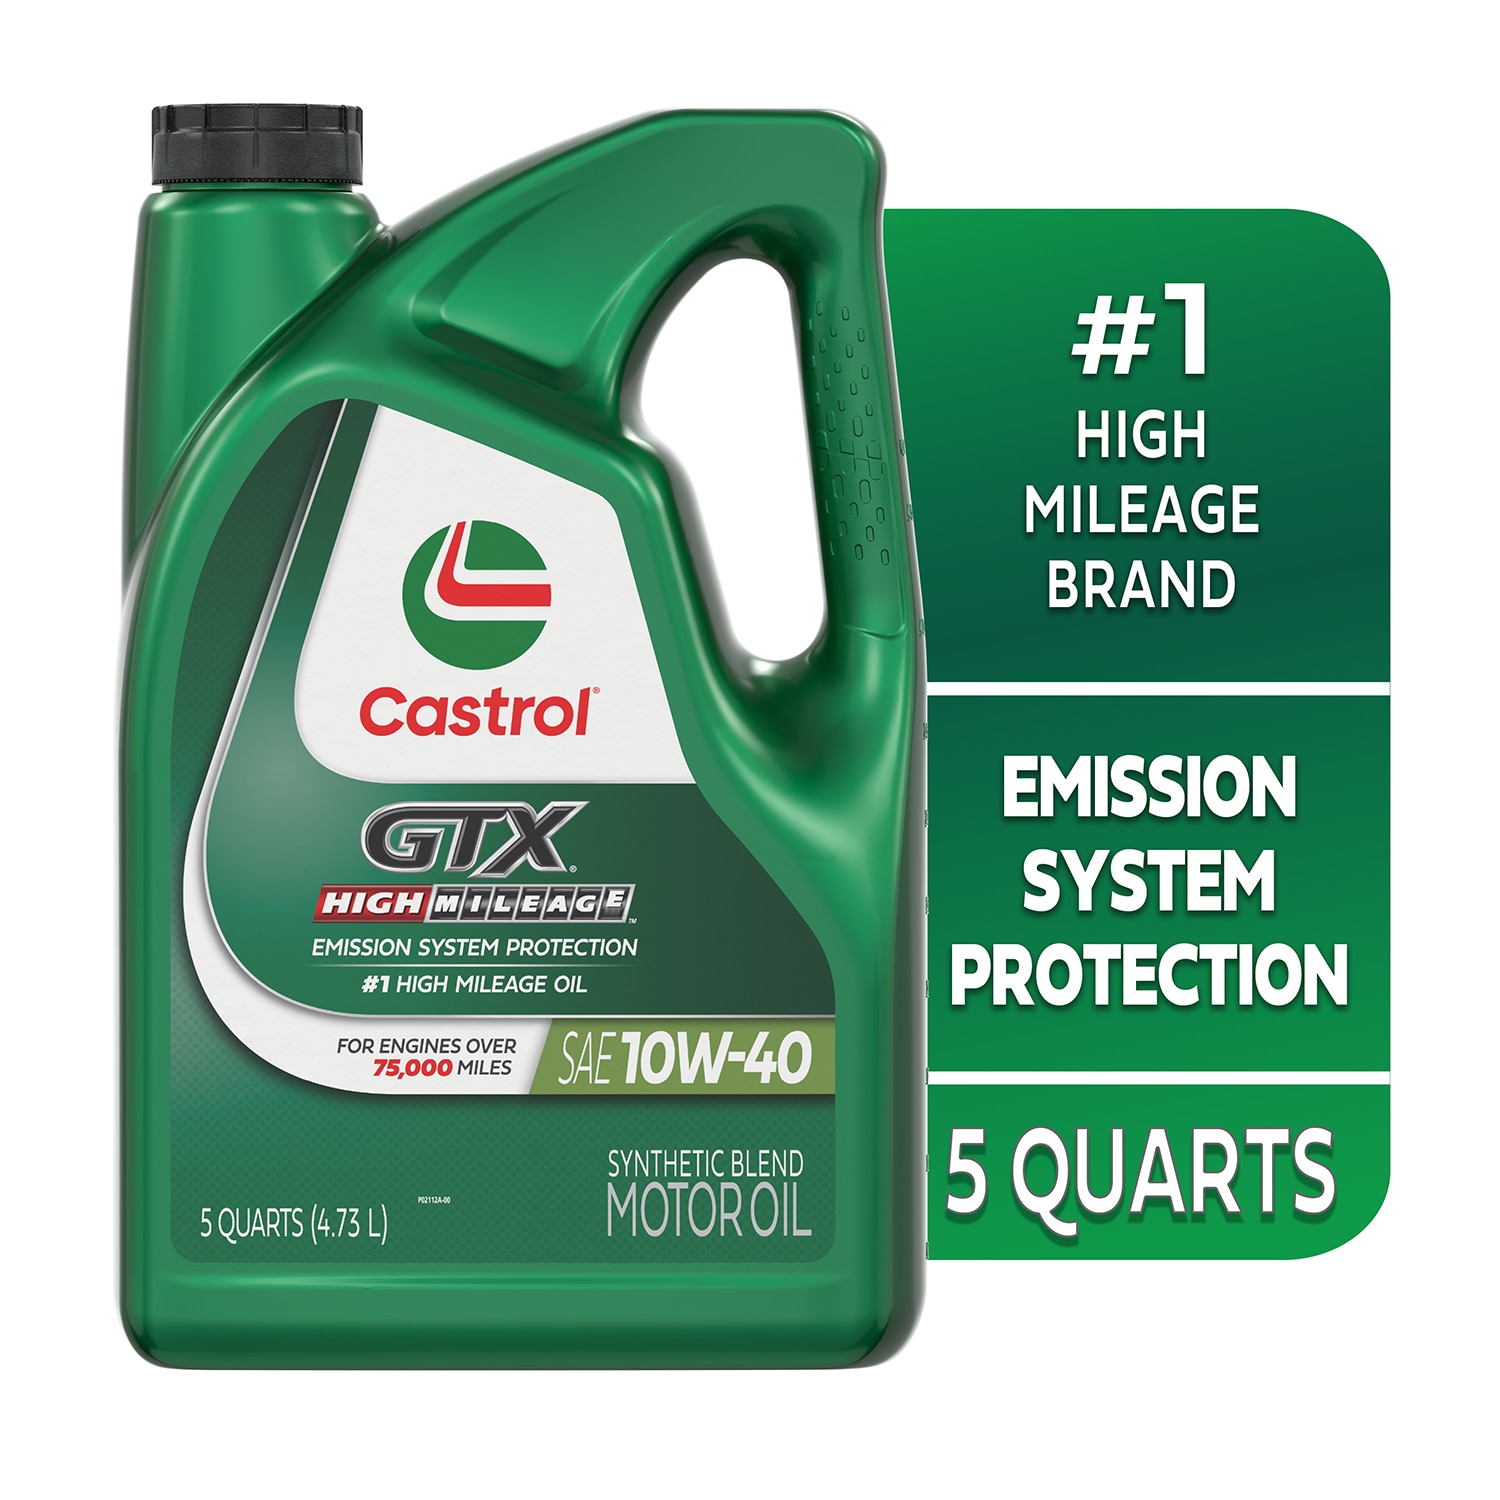 CASTROL Gtx High Mileage 10w-40 5 Qt in the Motor Oil u0026 Additives  department at Lowes.com